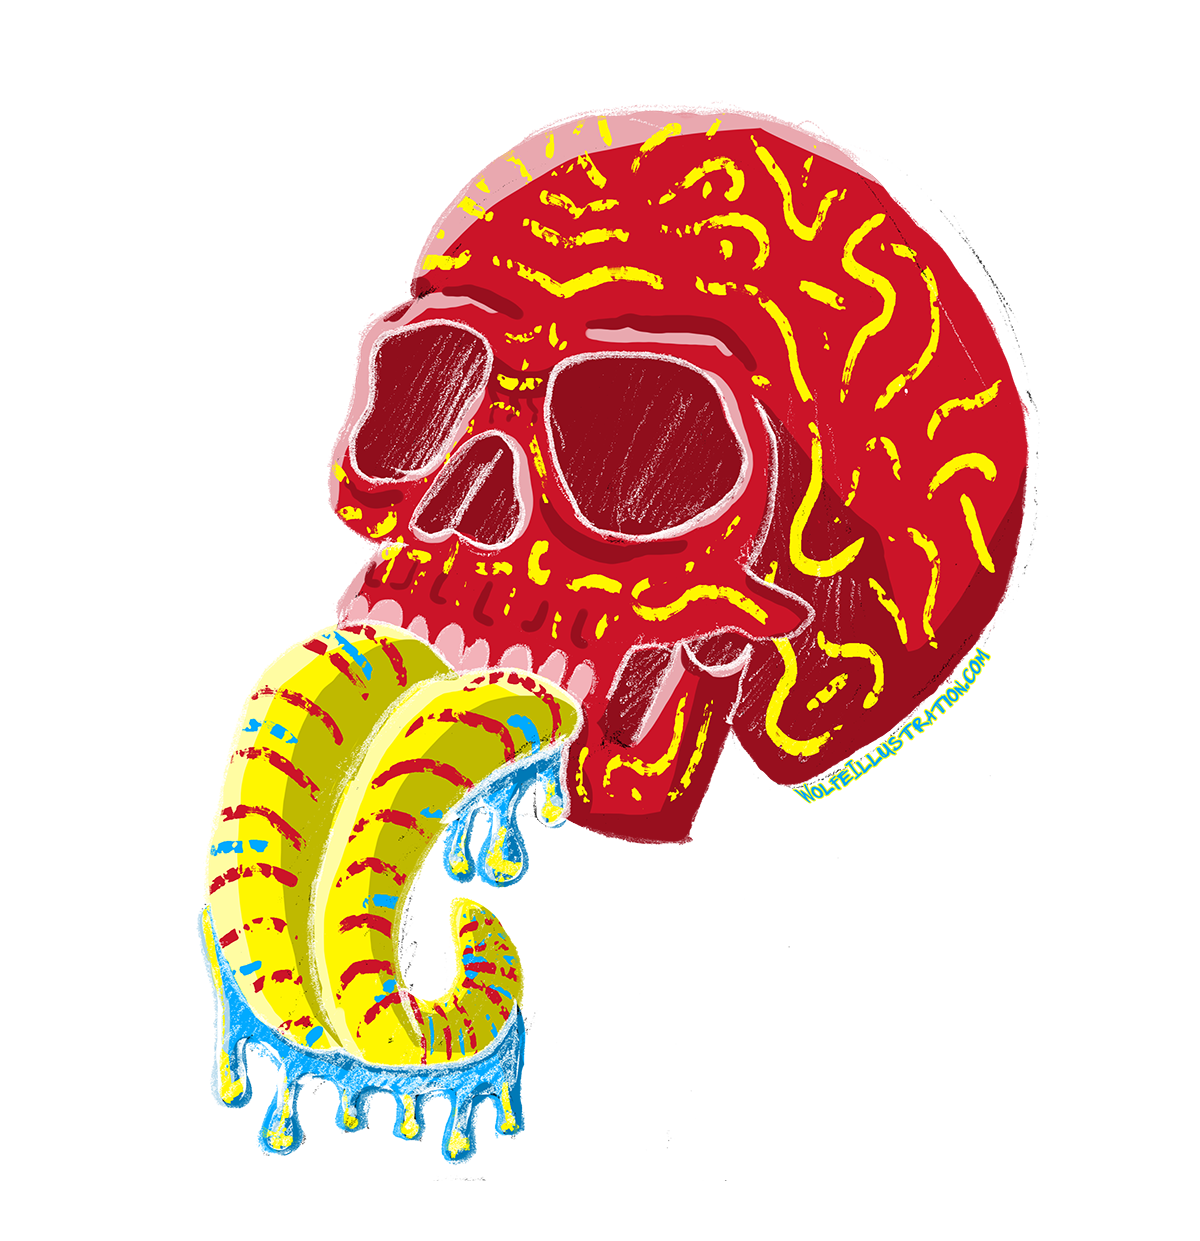 A illustration by Brian Wolfe of a red skull with a yellow tongue dripping with saliva.